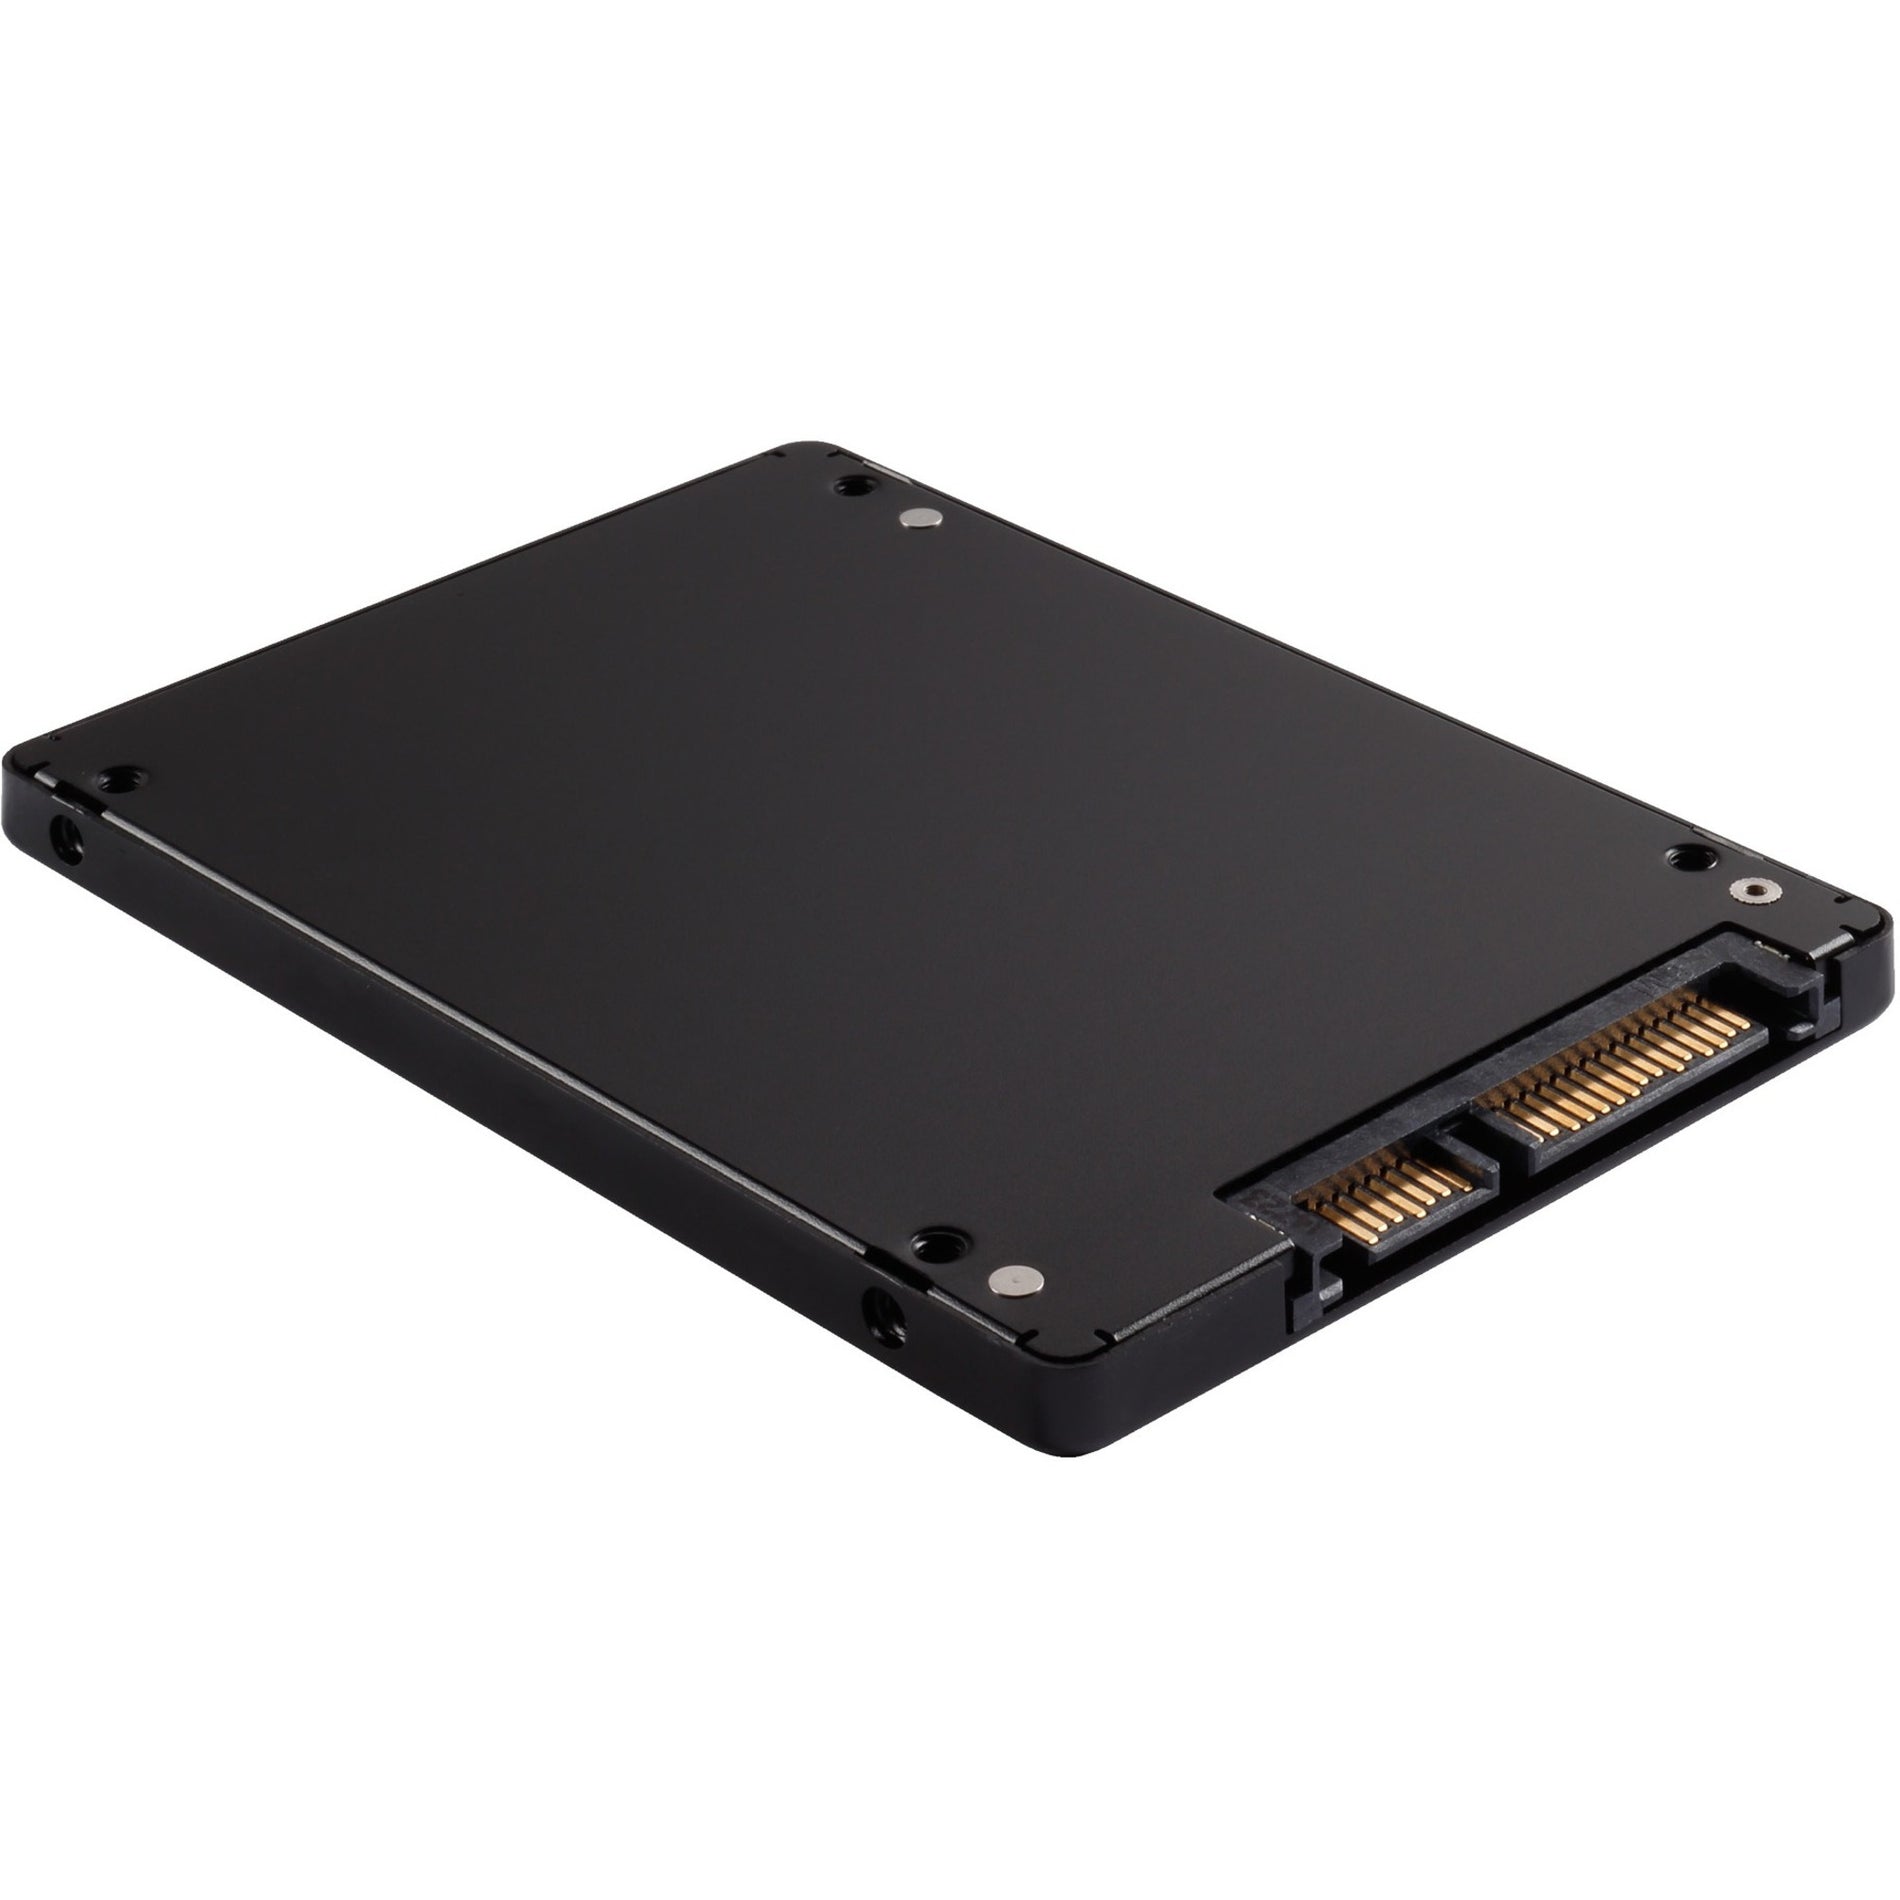 VisionTek 901411 4TB TLC 2.5" SSD, High Capacity Solid State Drive for Desktop and Laptop Systems